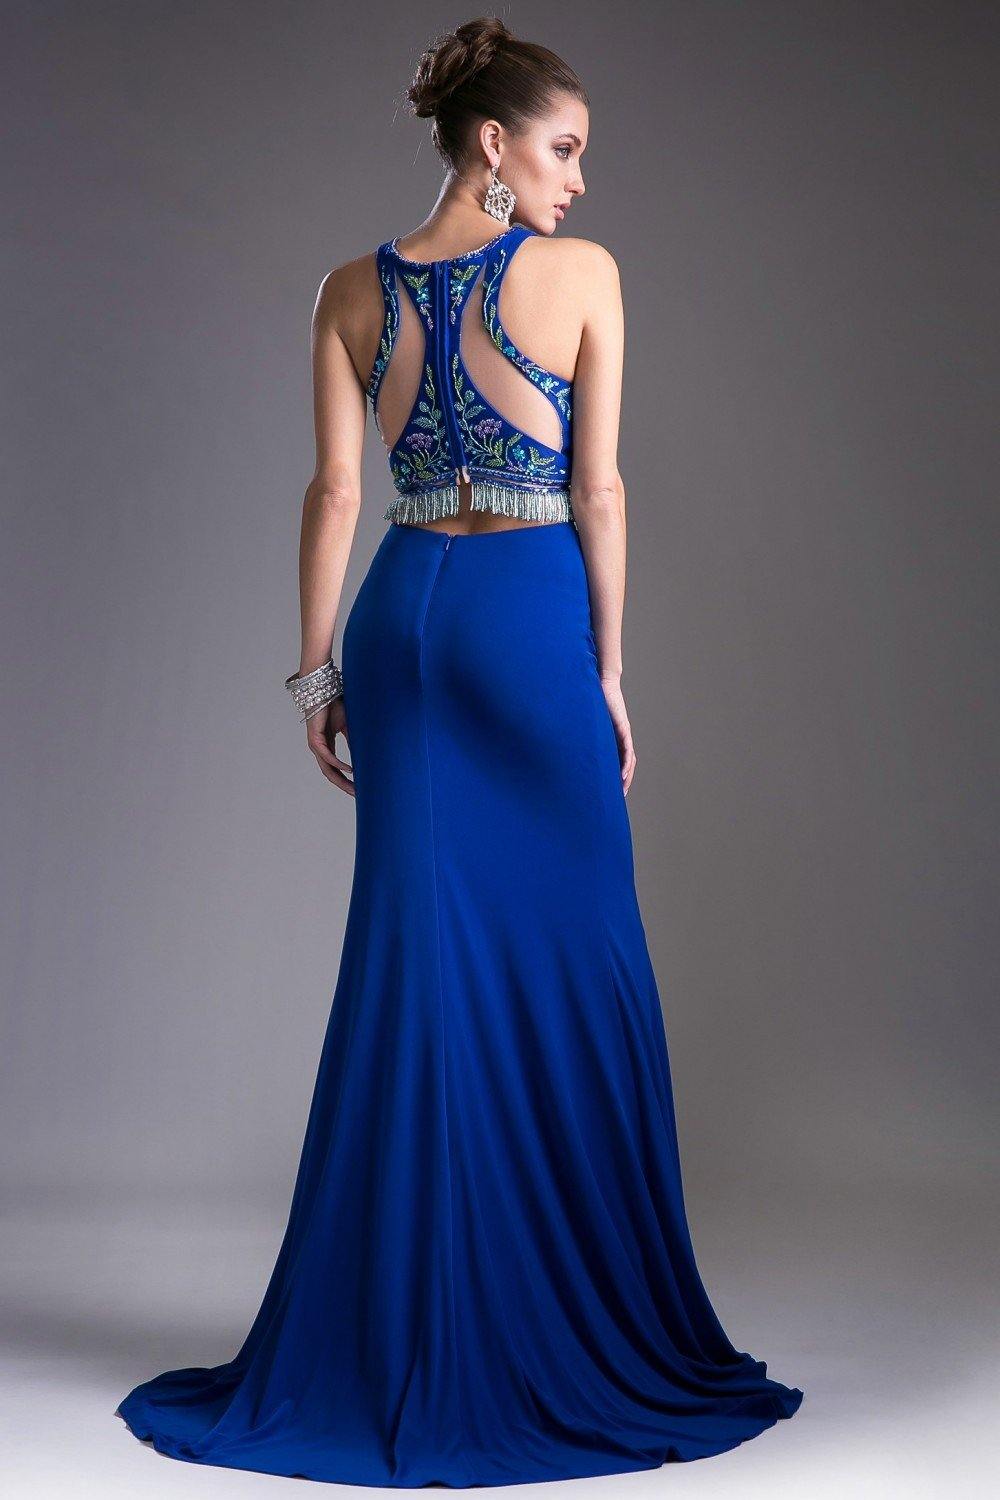 Prom Two Piece Fitted Dress - The Dress Outlet